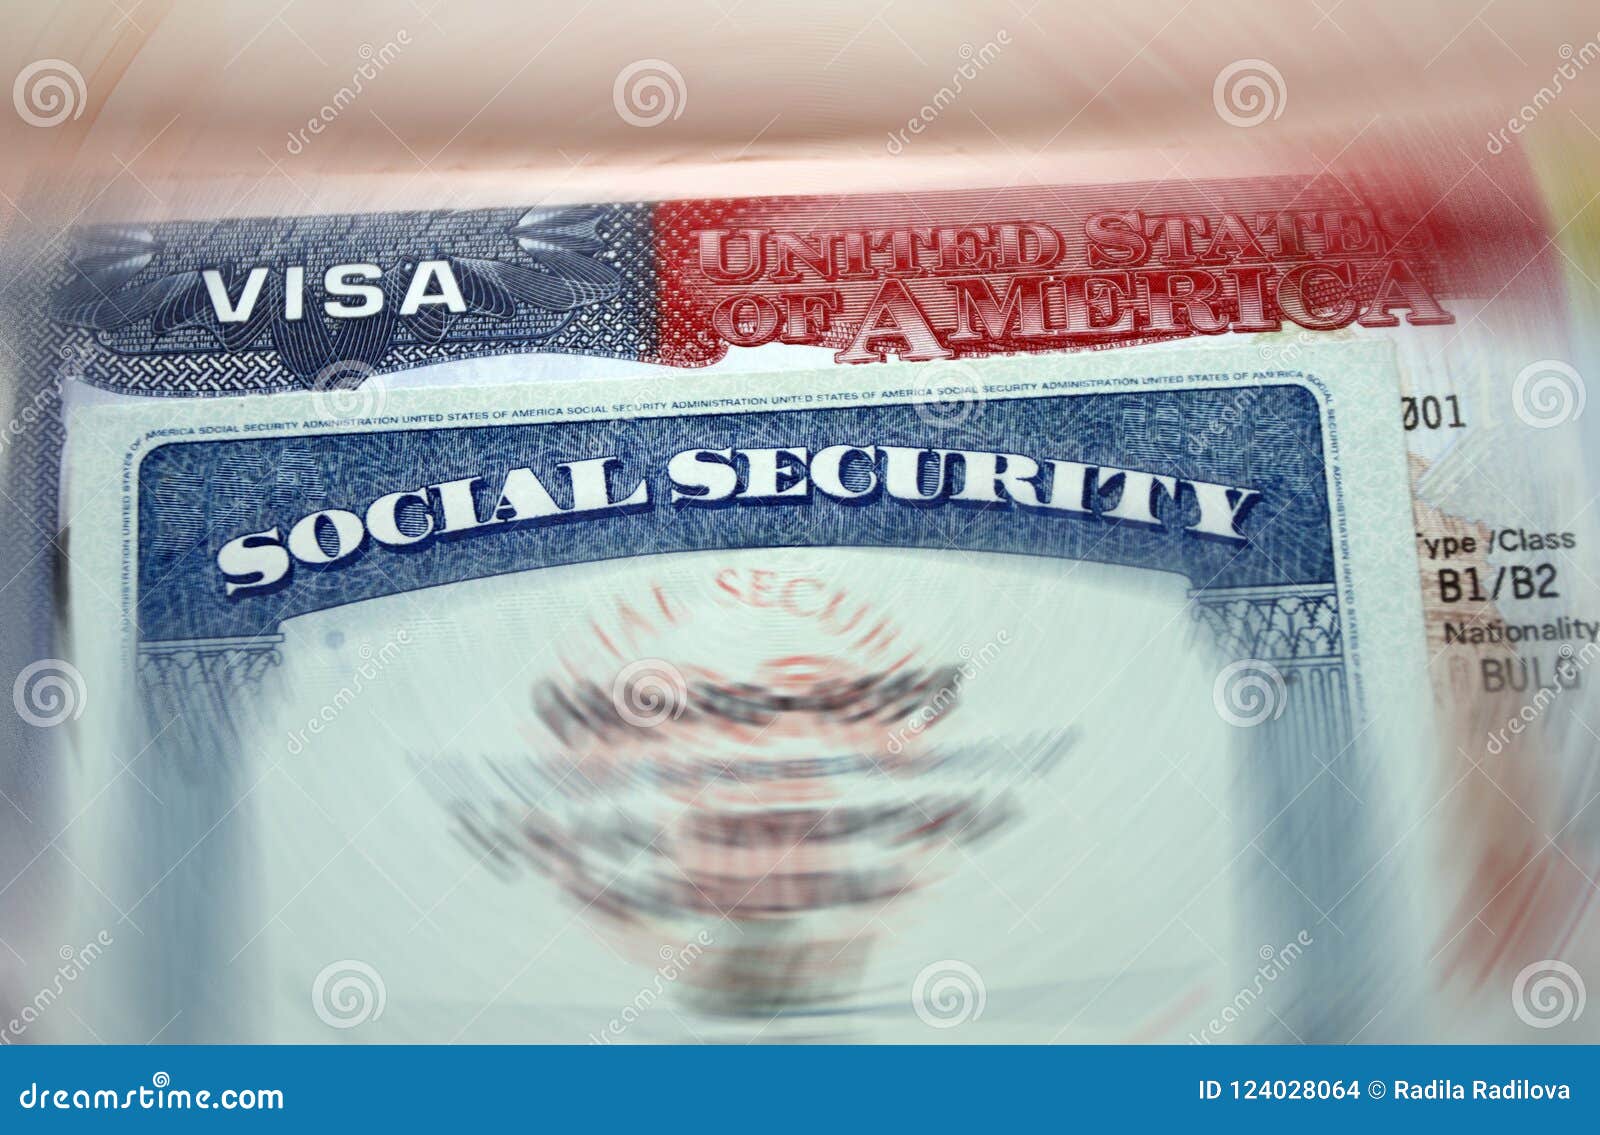 the american visa in a passport page usa background and sacial security nember personal document. ssn Ã¢â¬â social security number f